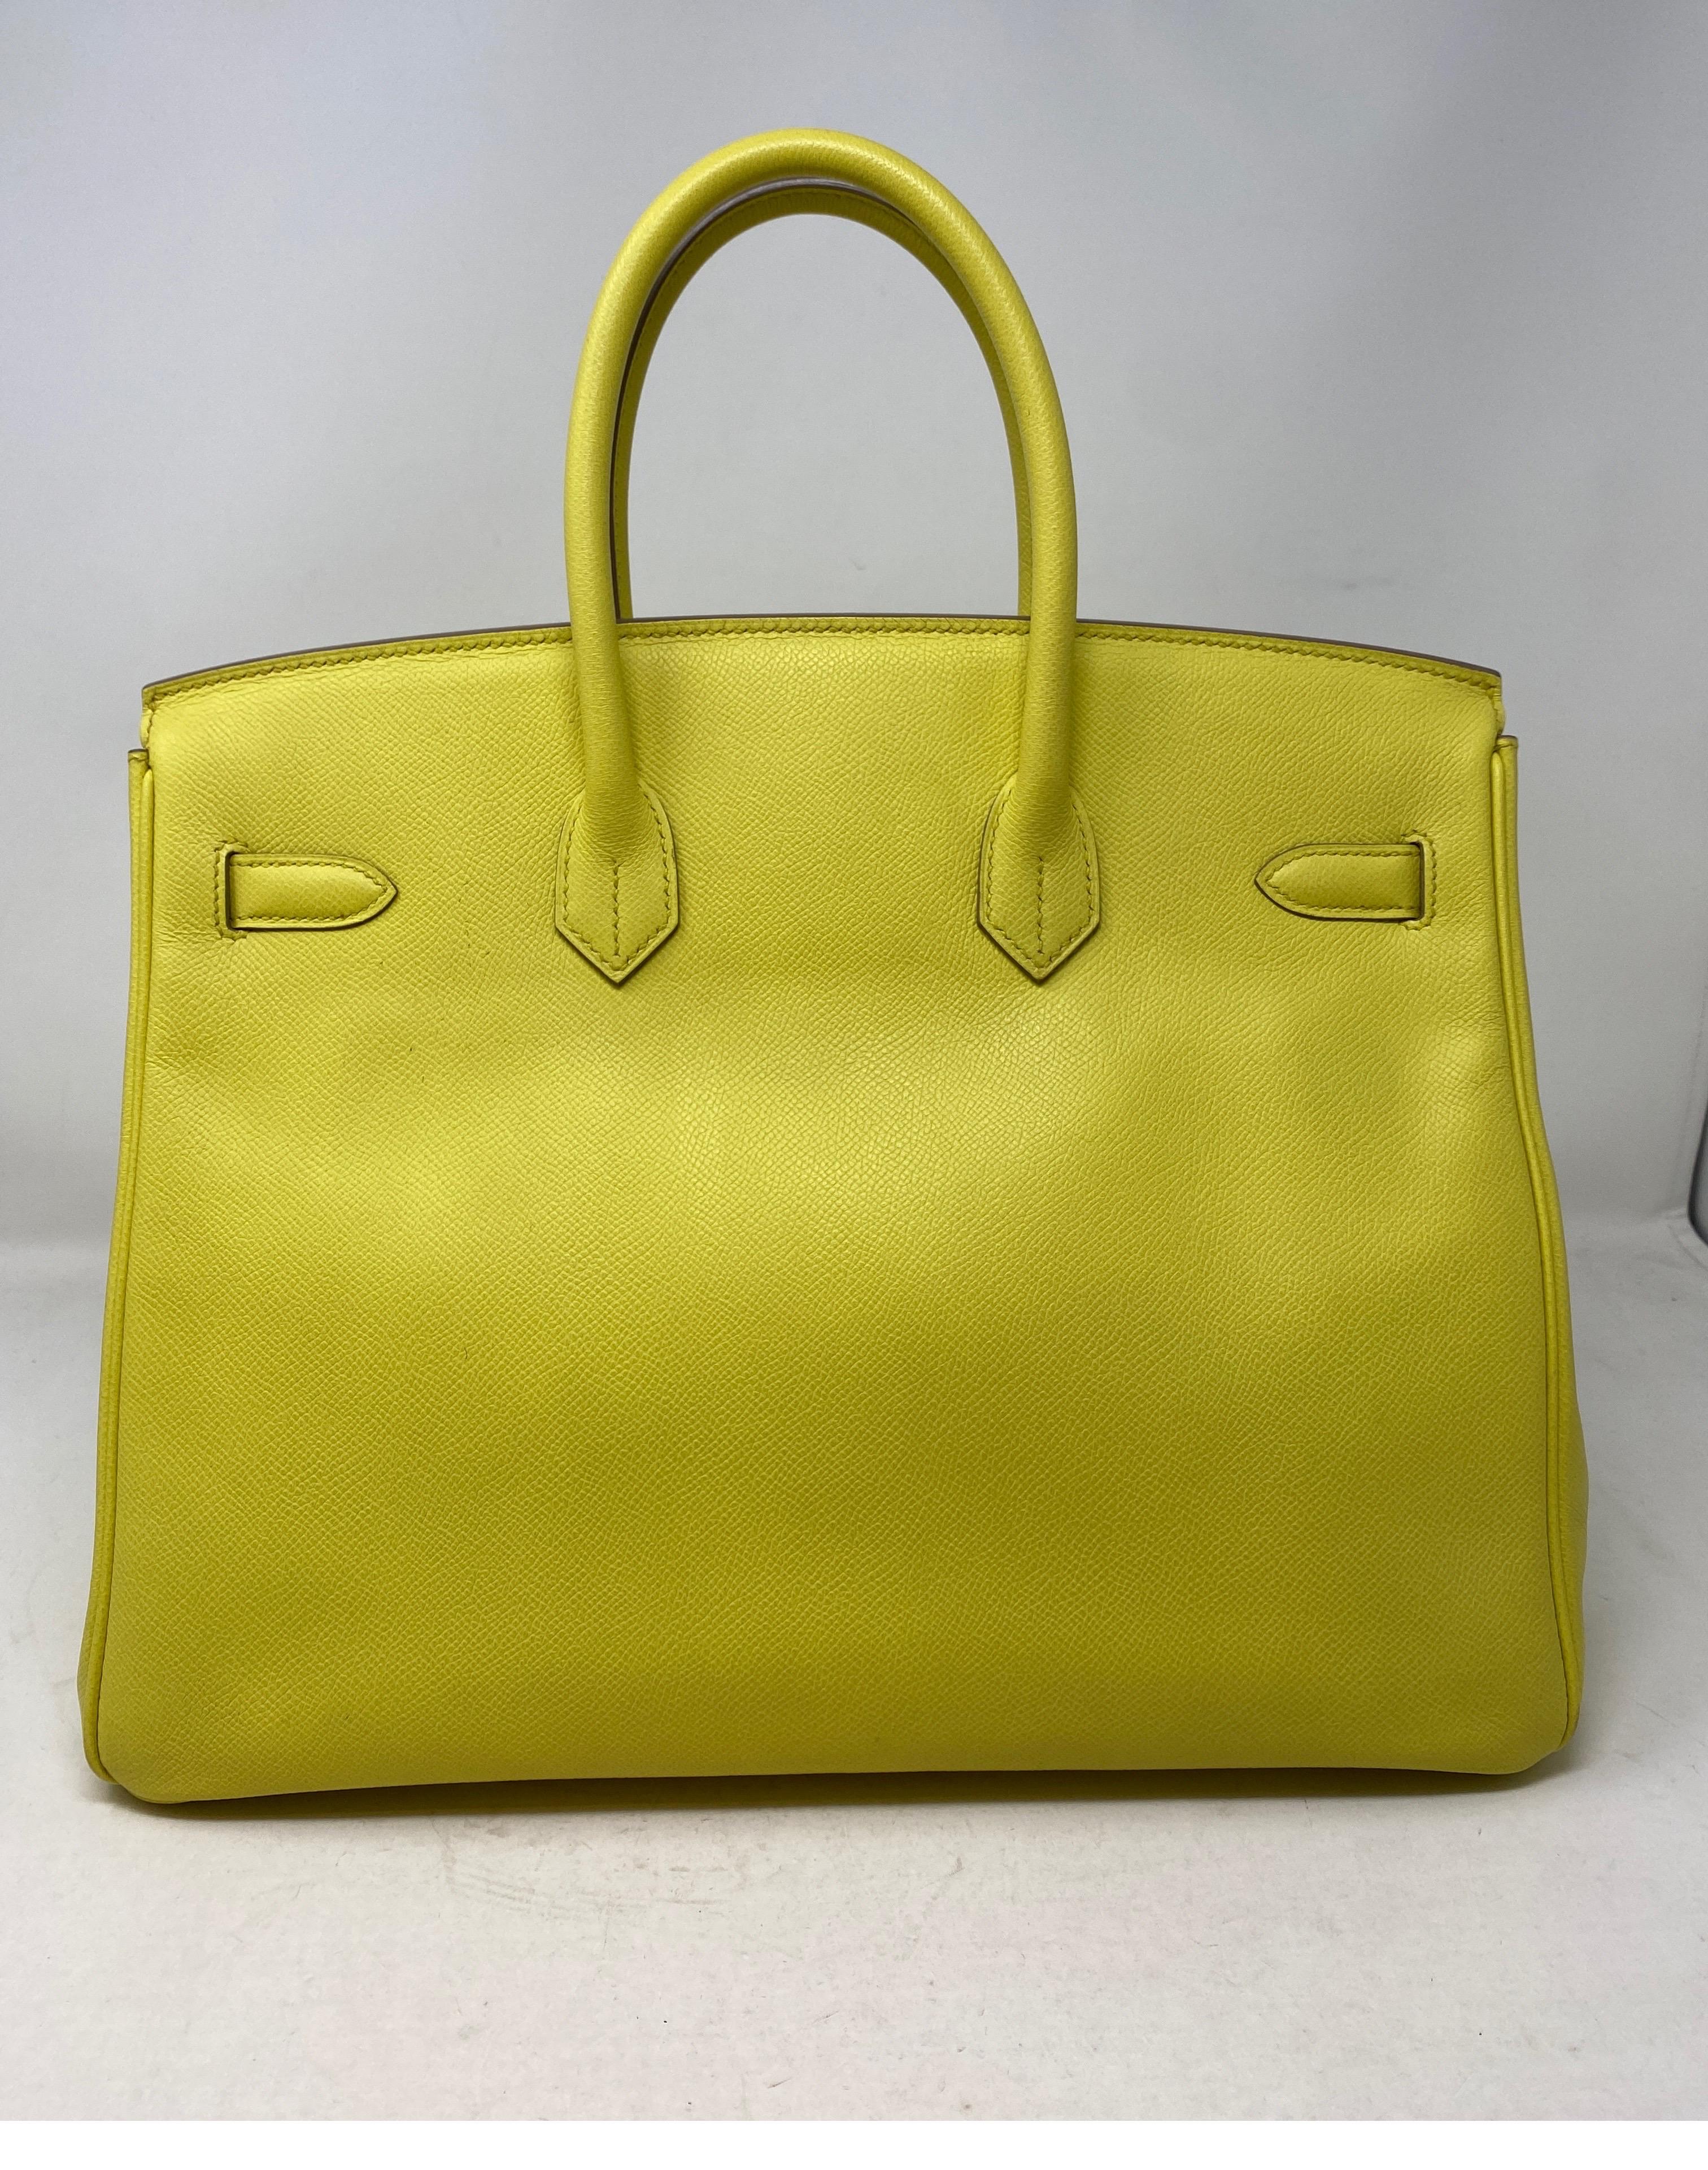 Hermes Birkin Souffre Yellow Birkin Bag. Gold hardware. Good condition. Light yellow color in epsom leather. Rare combination. Includes clochette, lock, keys, and dust cover. Guaranteed authentic. 